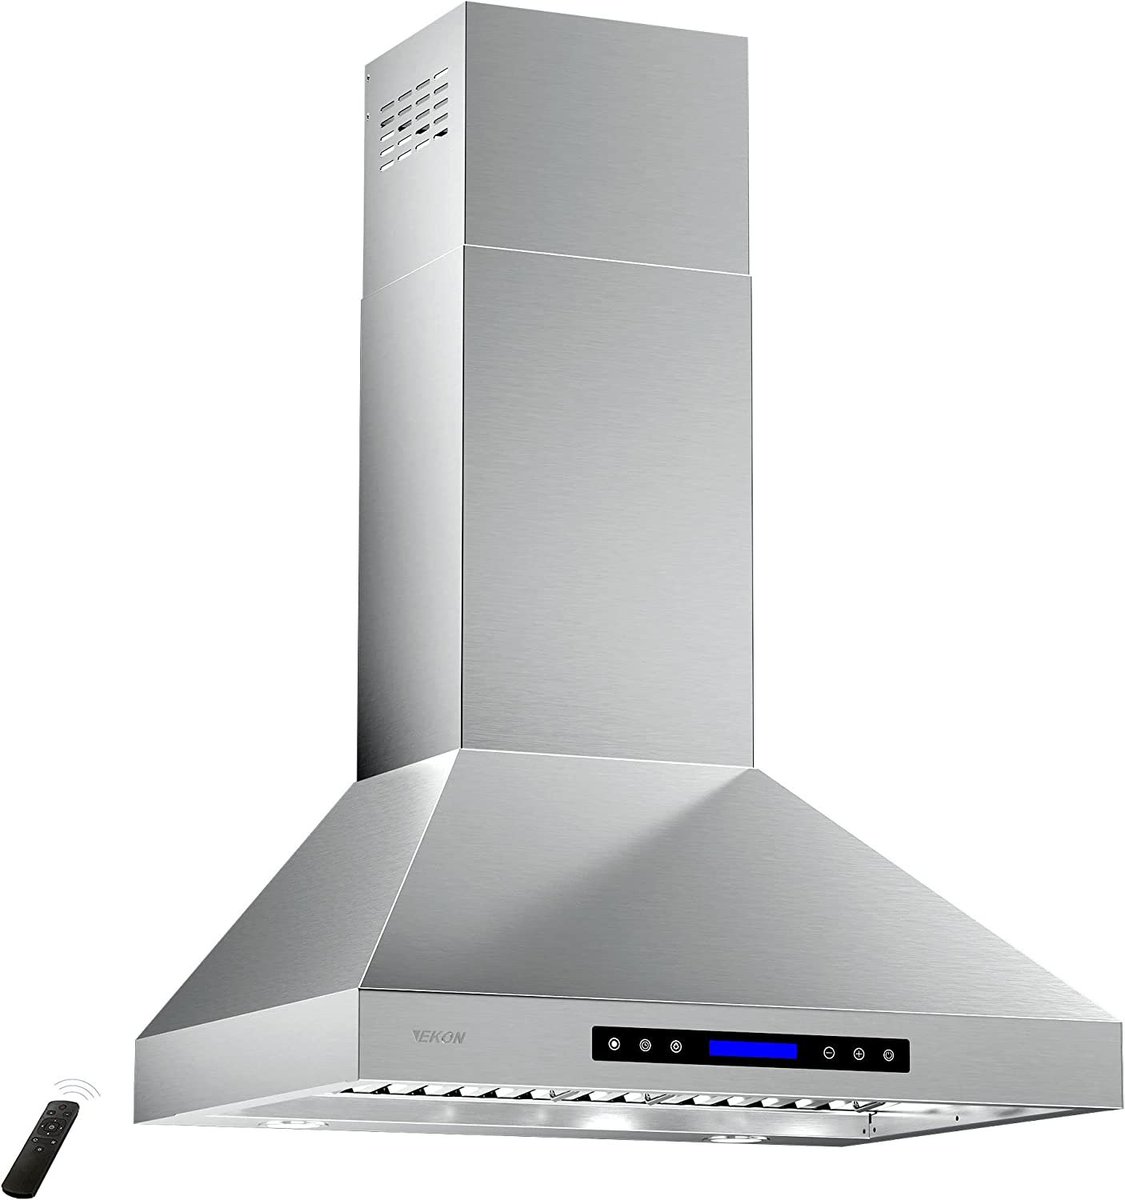 Wall Range Hood 2023: Reviews And Rankings For You
wildriverreview.com/wall-range-hoo…

#bestproductreviews #homeappliances #cookingappliances #kitchenanddining #rangehood #bestrangehood #wallrangehood